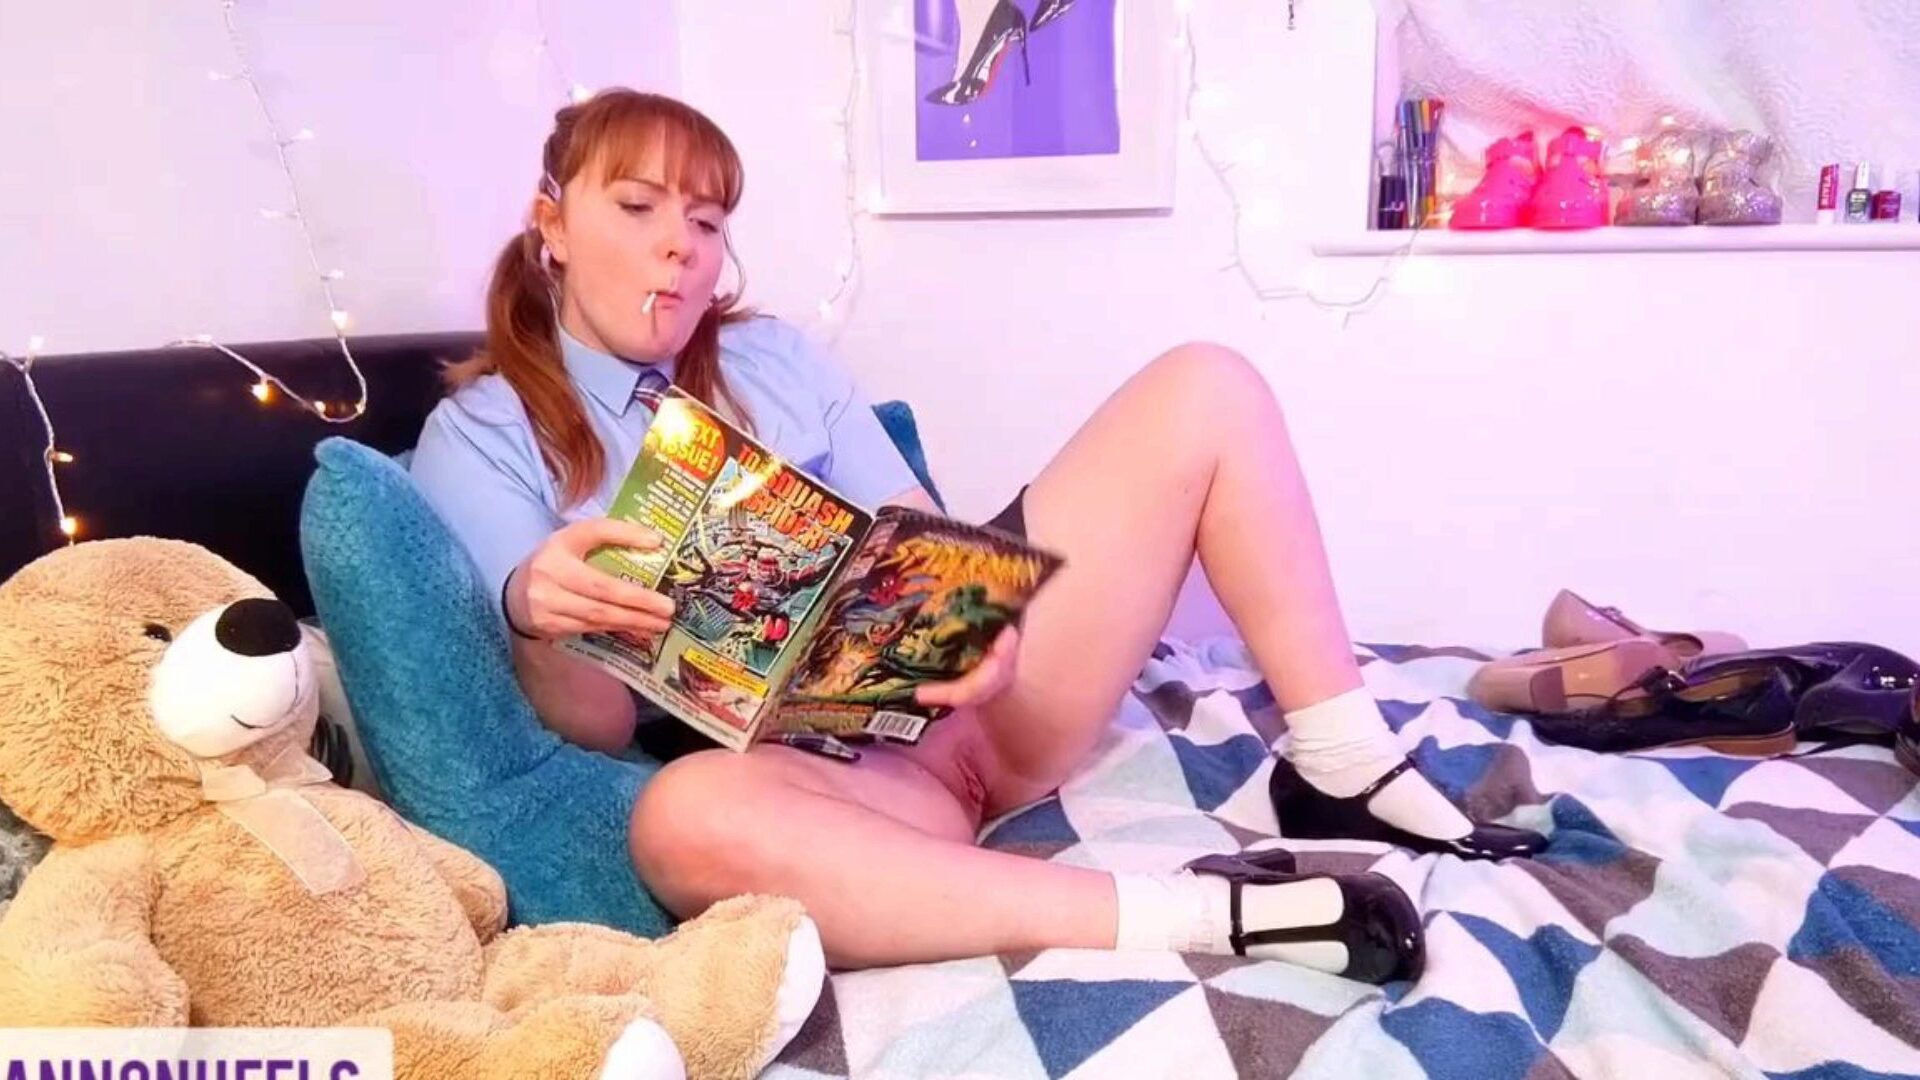 Fuck My Butt Stepbro Schoolgirl Slut - Shannon Heels... Watch Fuck My Butt Stepbro Schoolgirl Slut - Shannon Heels clip on xHamster - the ultimate archive of free-for-all British Butt Tube HD gonzo porno tube episodes